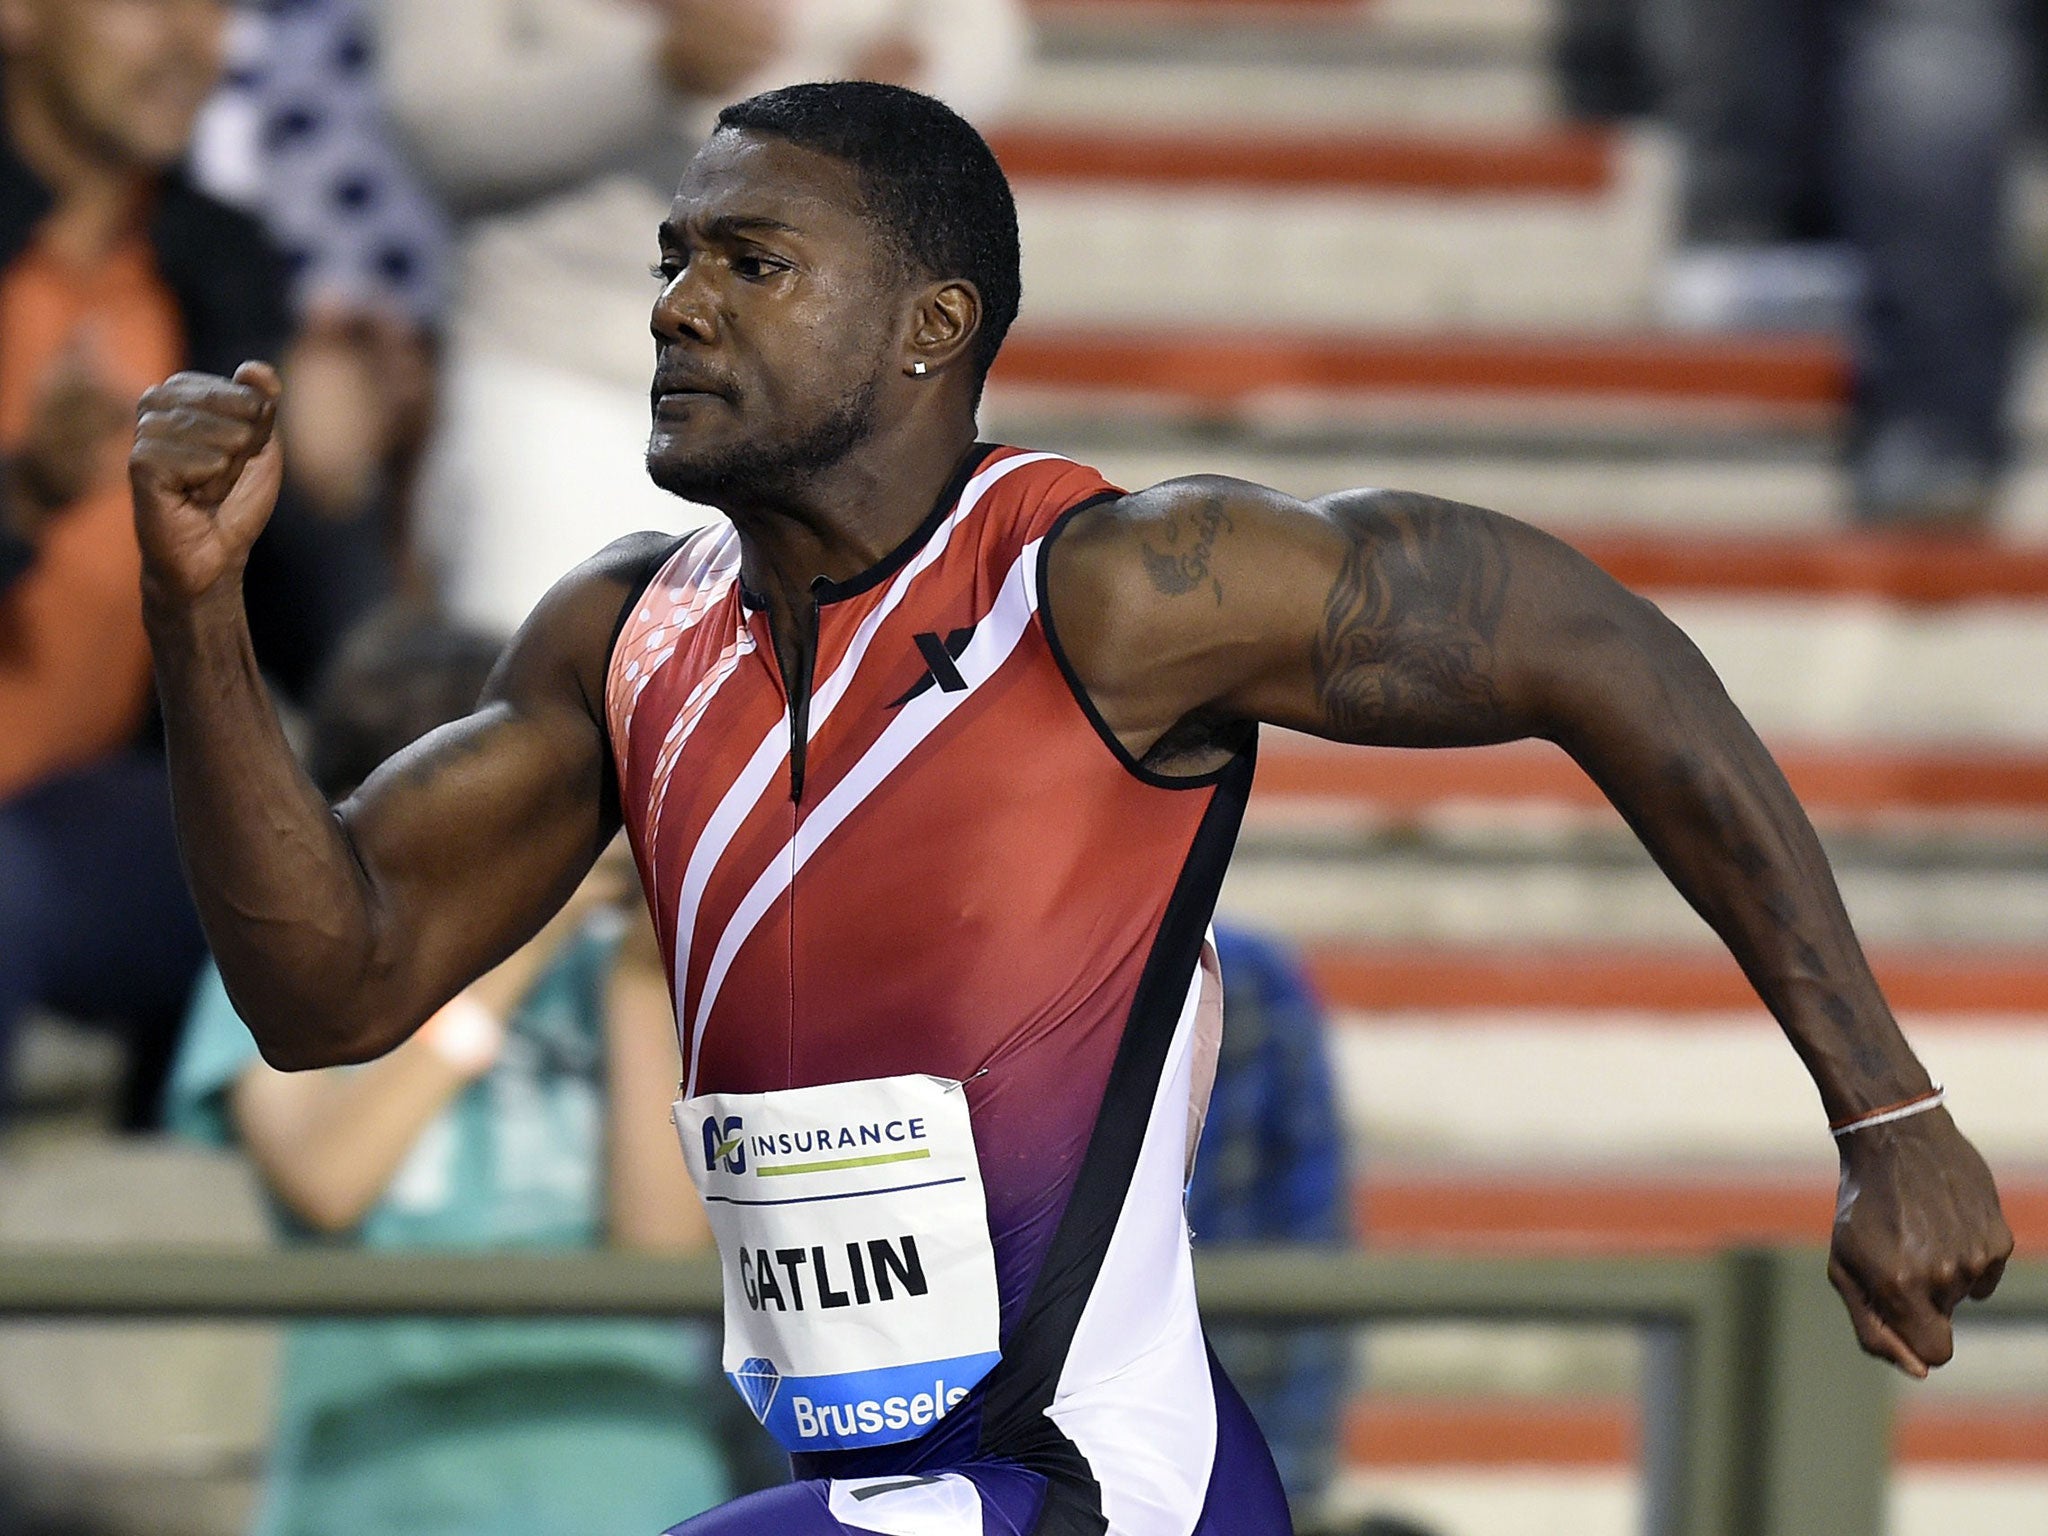 Justin Gatlin won 100m bronze at the London Olympics but has received two doping bans